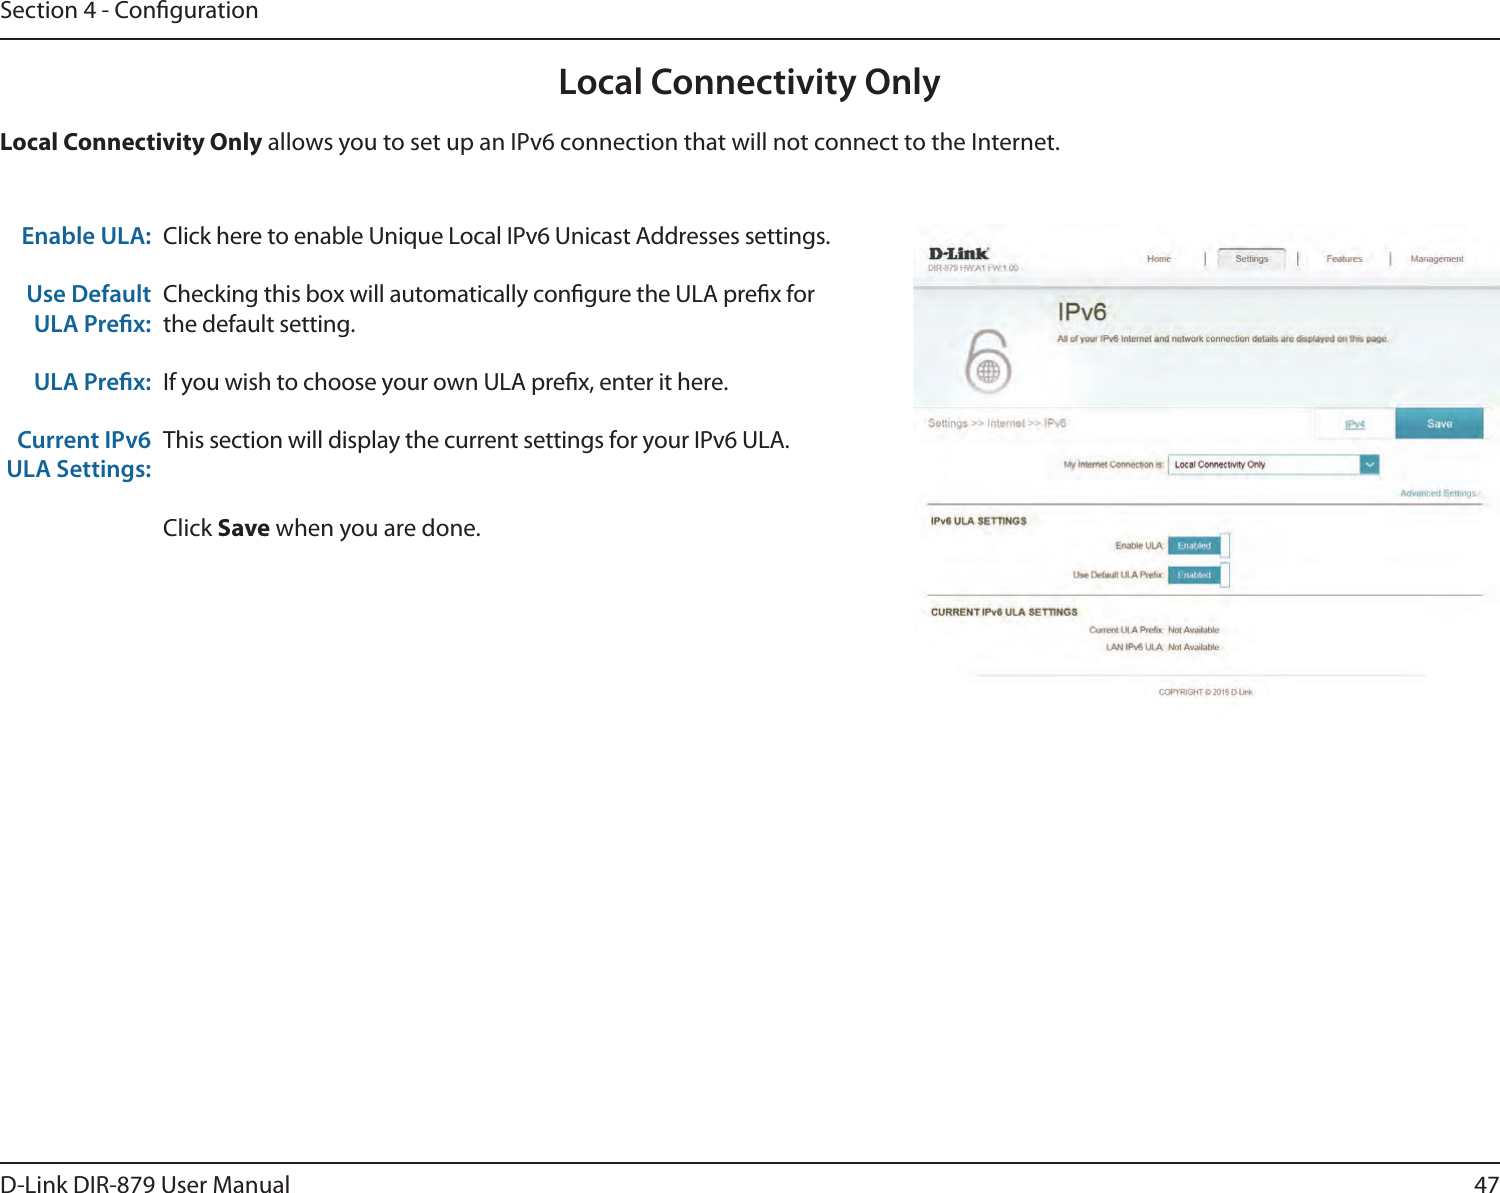 47D-Link DIR-879 User ManualSection 4 - CongurationLocal Connectivity OnlyClick here to enable Unique Local IPv6 Unicast Addresses settings.Checking this box will automatically congure the ULA prex for the default setting.If you wish to choose your own ULA prex, enter it here.This section will display the current settings for your IPv6 ULA.Click Save when you are done.Enable ULA:Use Default ULA Prex:ULA Prex:Current IPv6 ULA Settings:Local Connectivity Only allows you to set up an IPv6 connection that will not connect to the Internet.